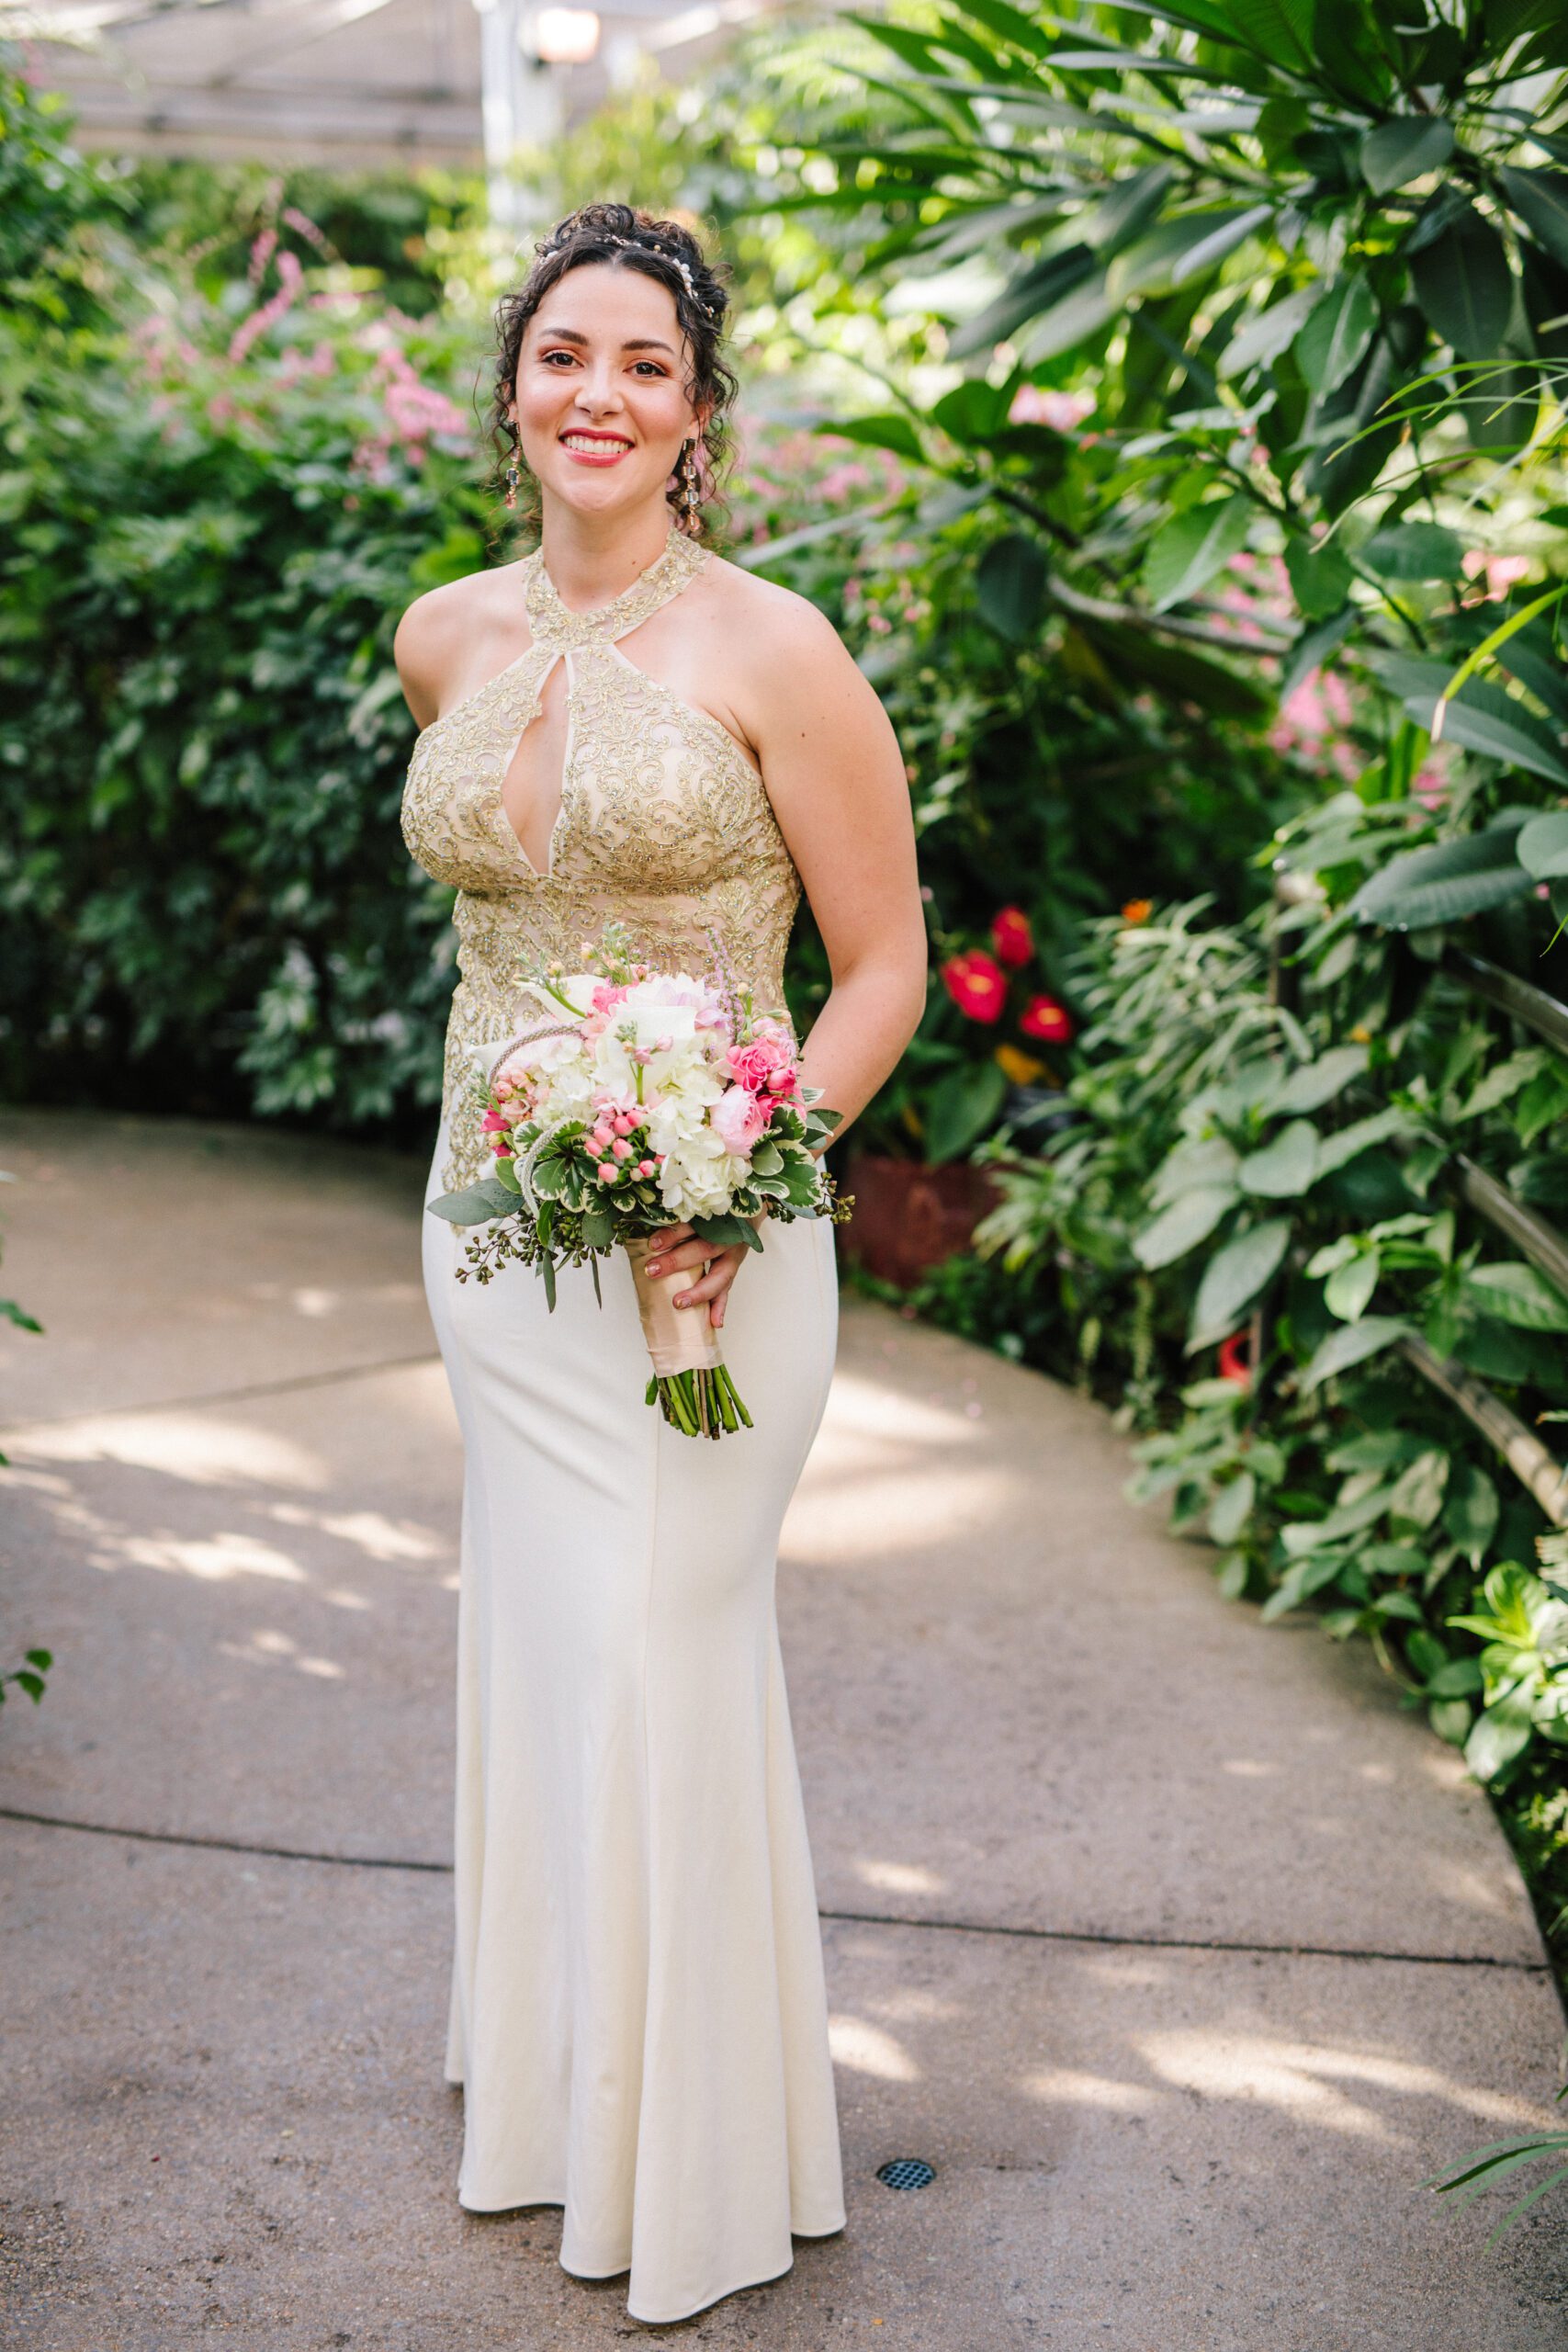 The gorgeous bride before her wedding at the Butterfly Pavilion.